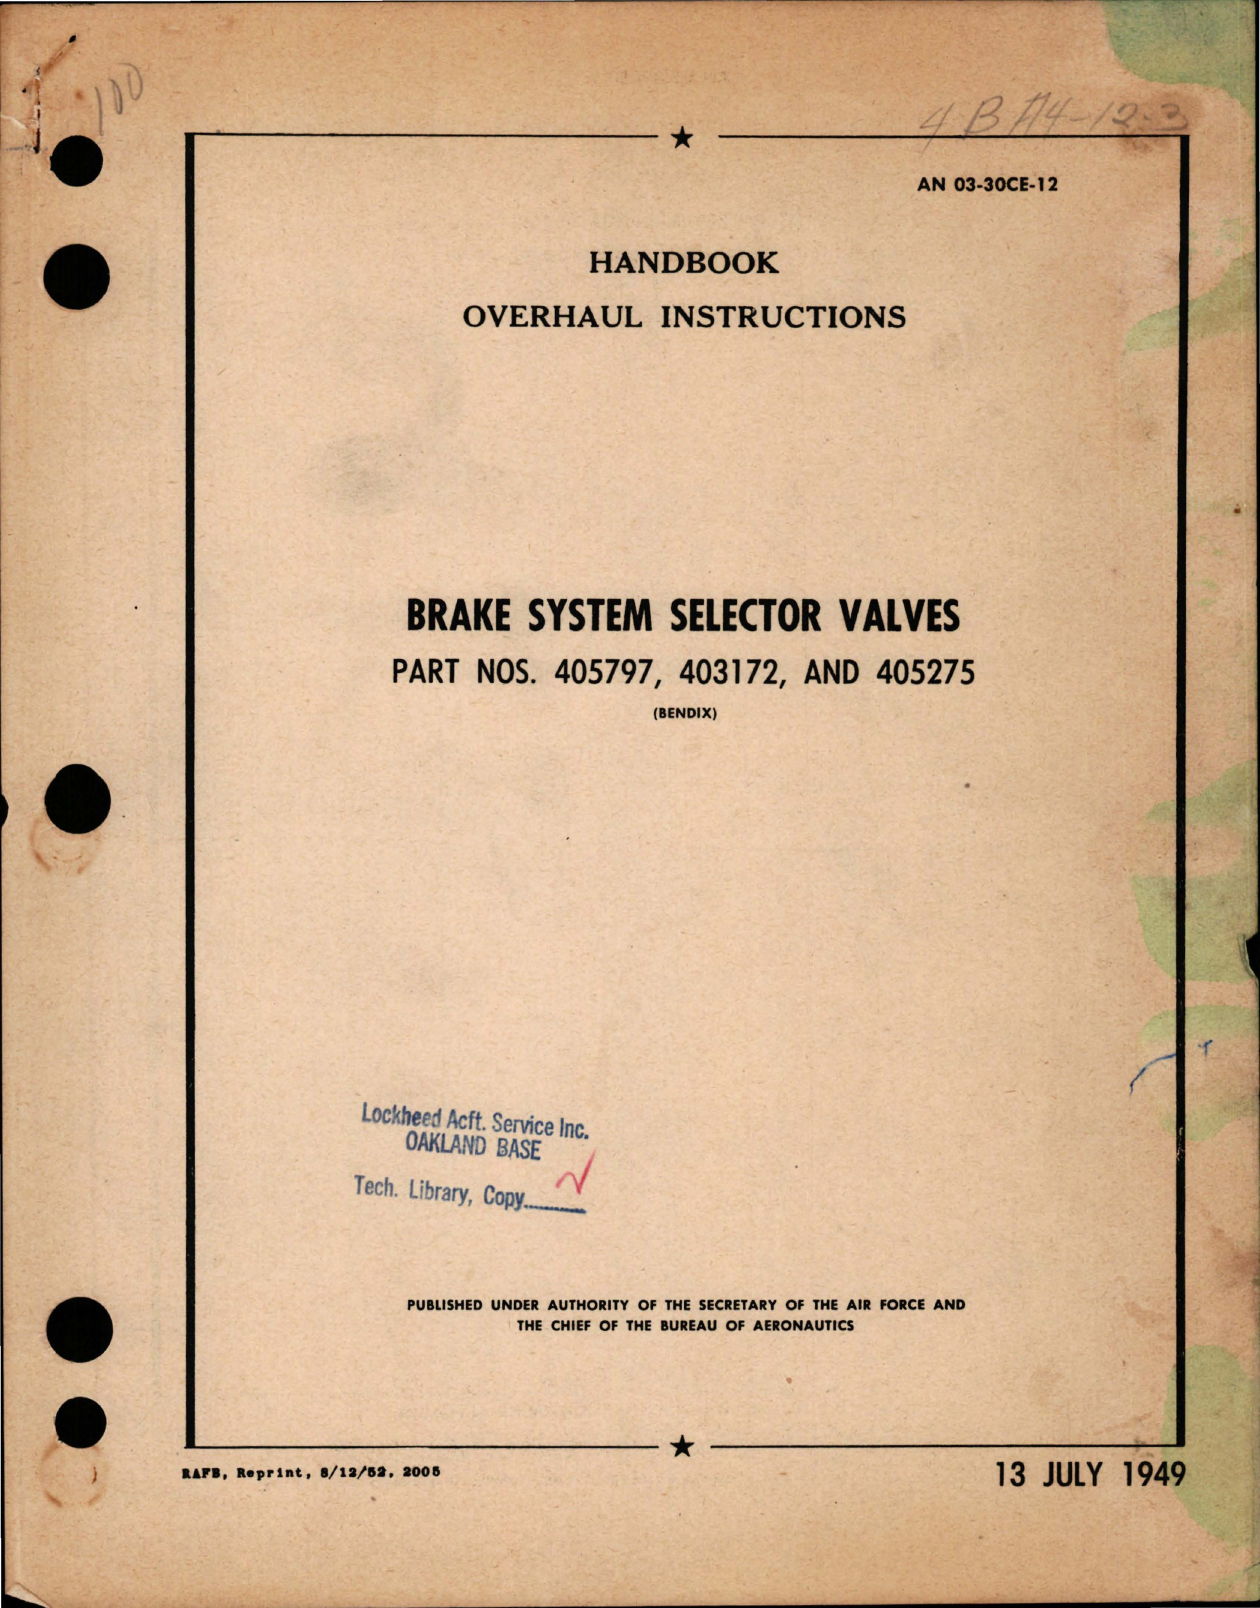 Sample page 1 from AirCorps Library document: Overhaul Instructions for Brake System Selector Valves - Parts 405797, 403172, and 425275